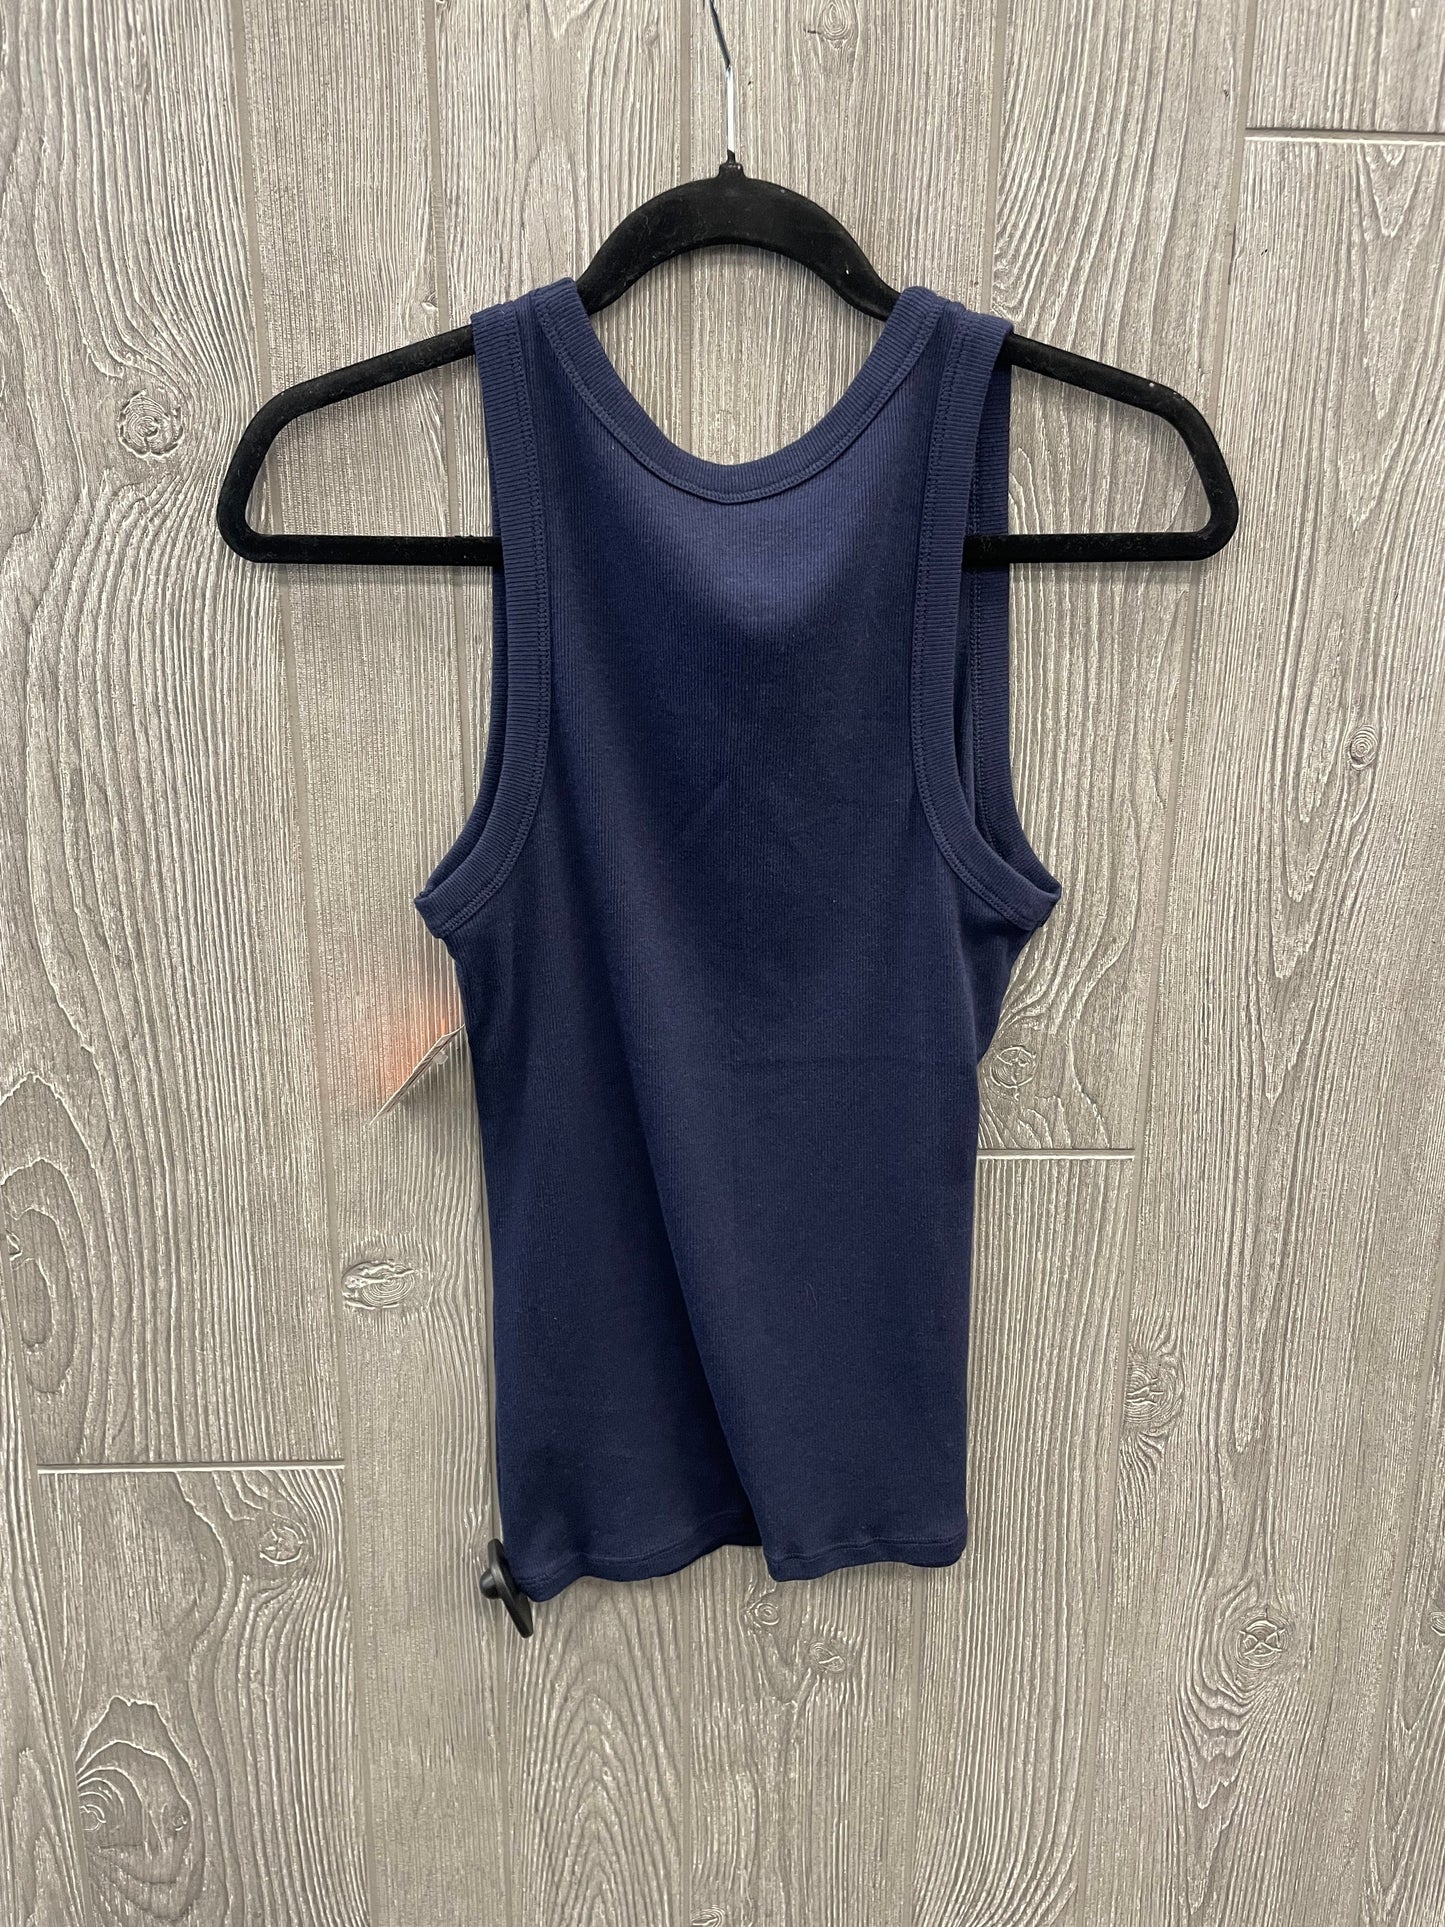 Tank Top By A New Day  Size: M